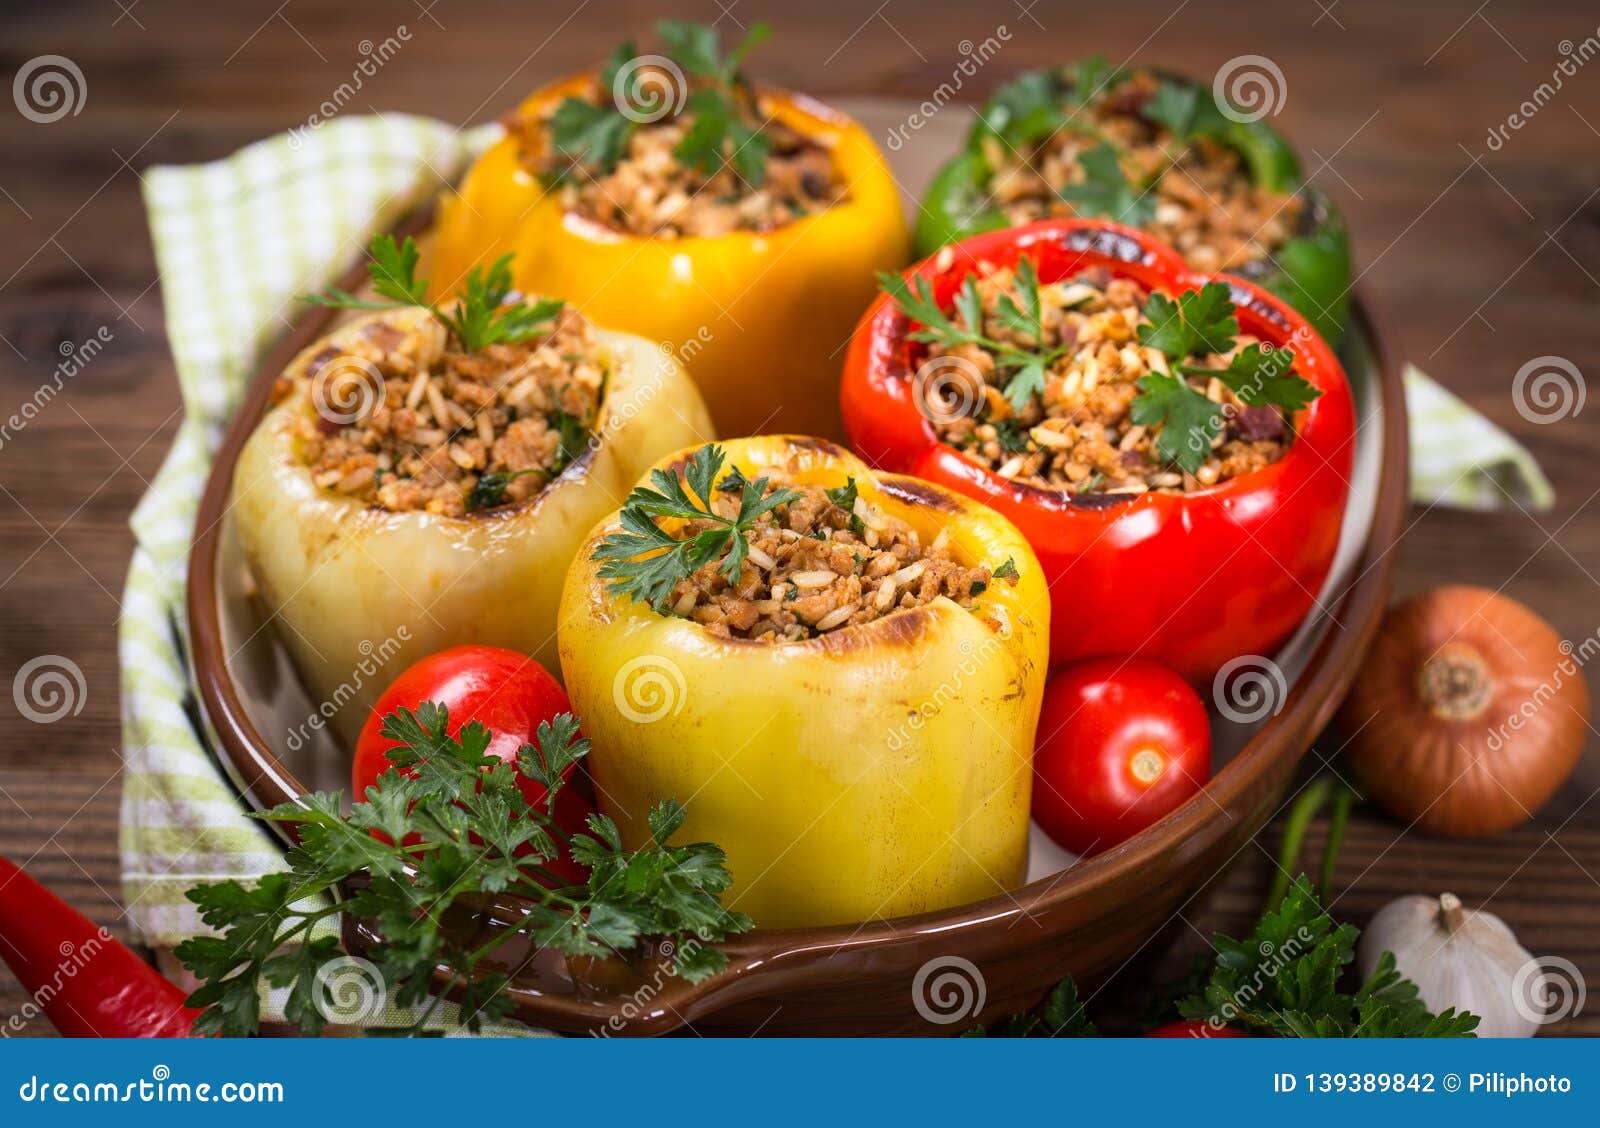 stuffed peppers with meat and rice